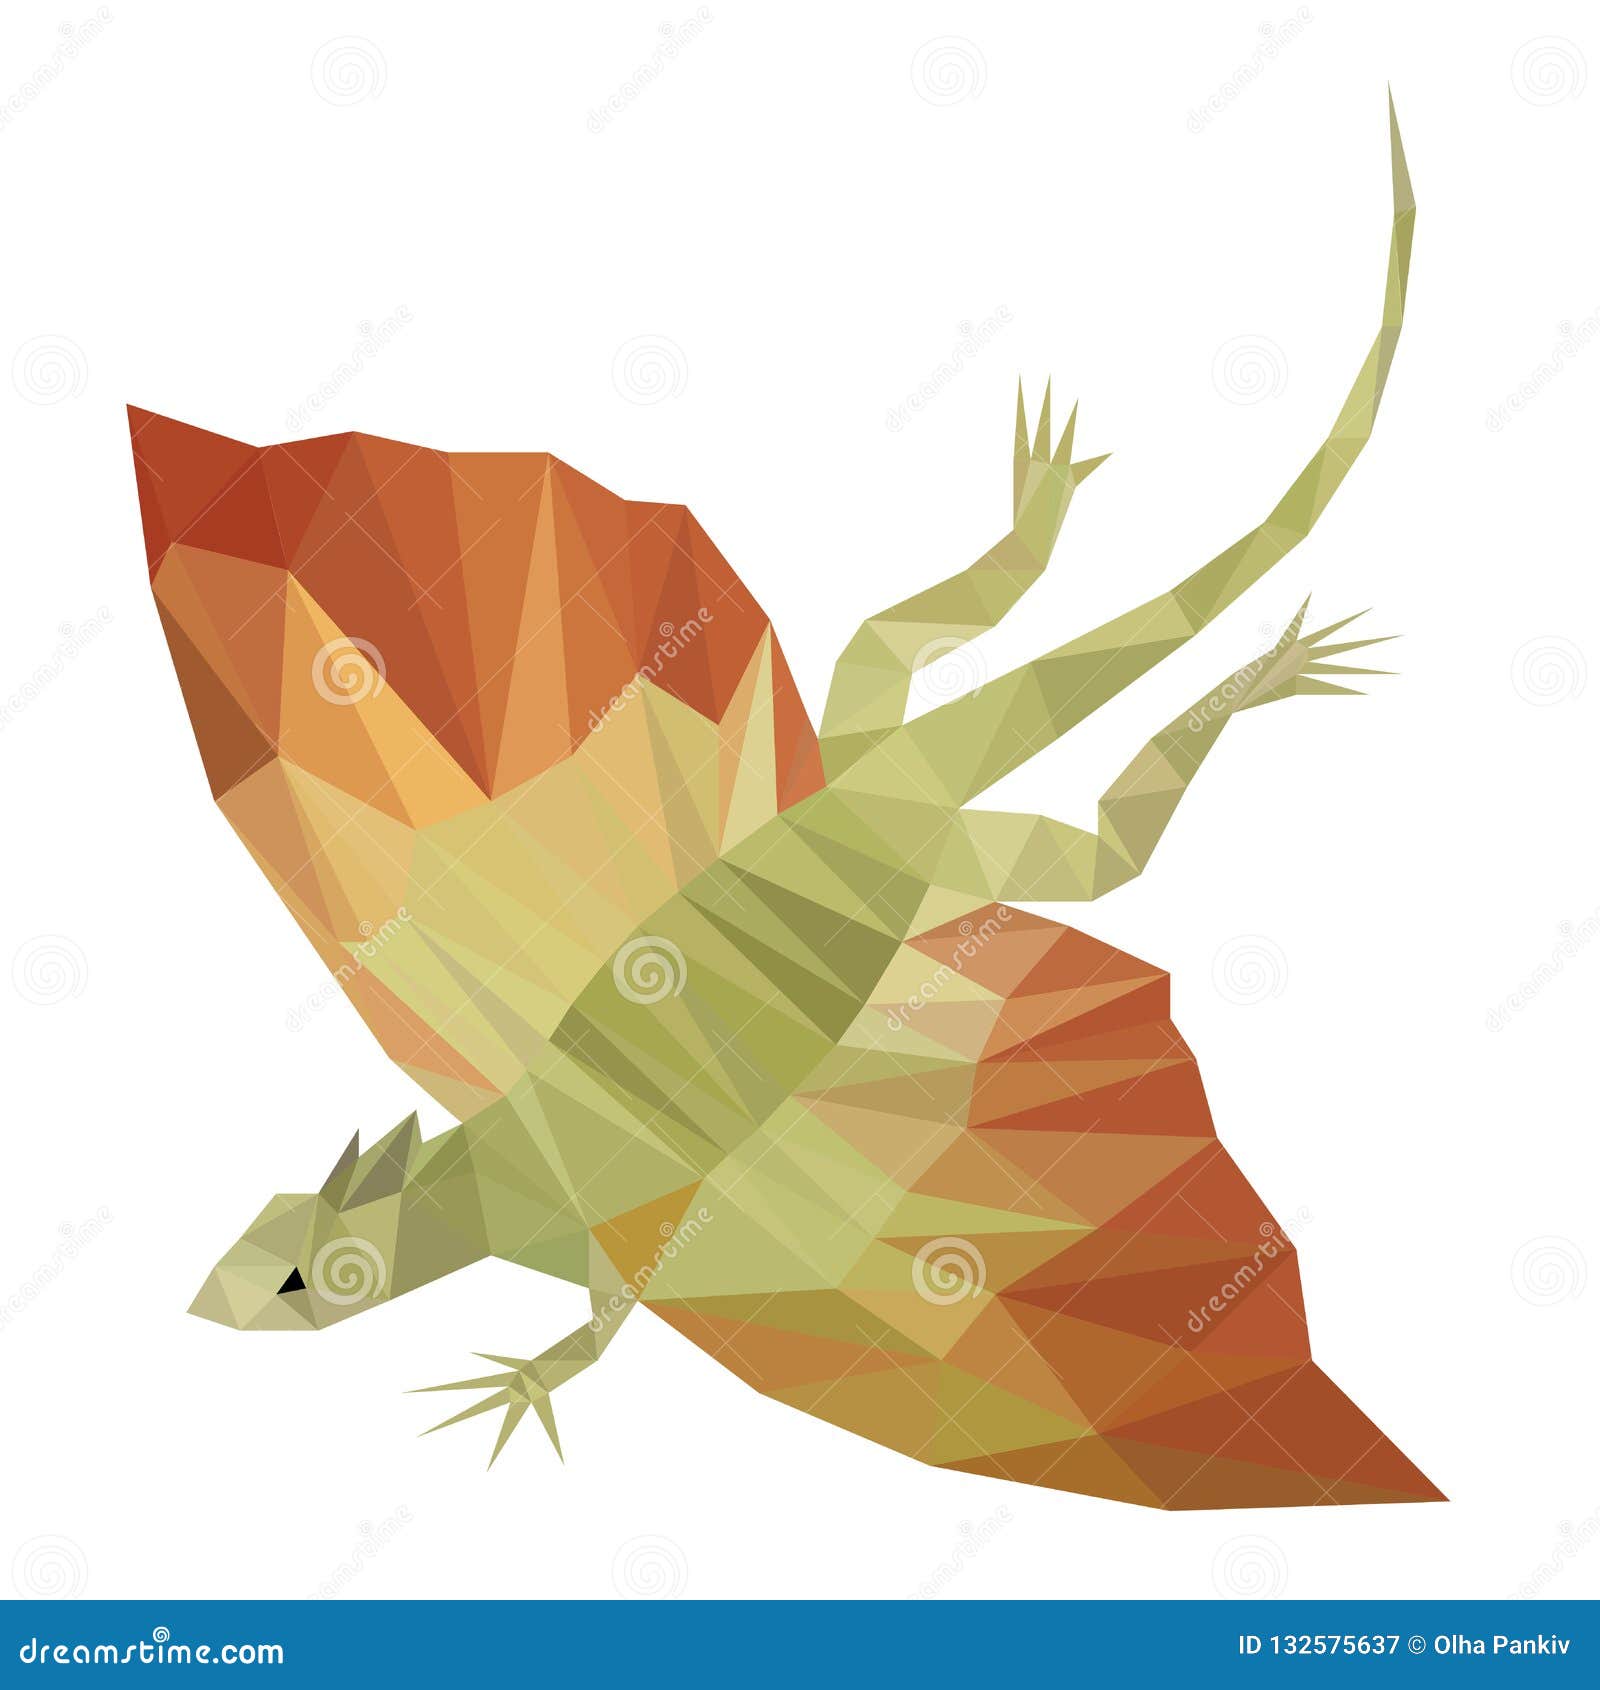 Flying Lizard Stock Illustrations 1 898 Flying Lizard Stock Illustrations Vectors Clipart Dreamstime,Instant Pot Chicken And Potatoes